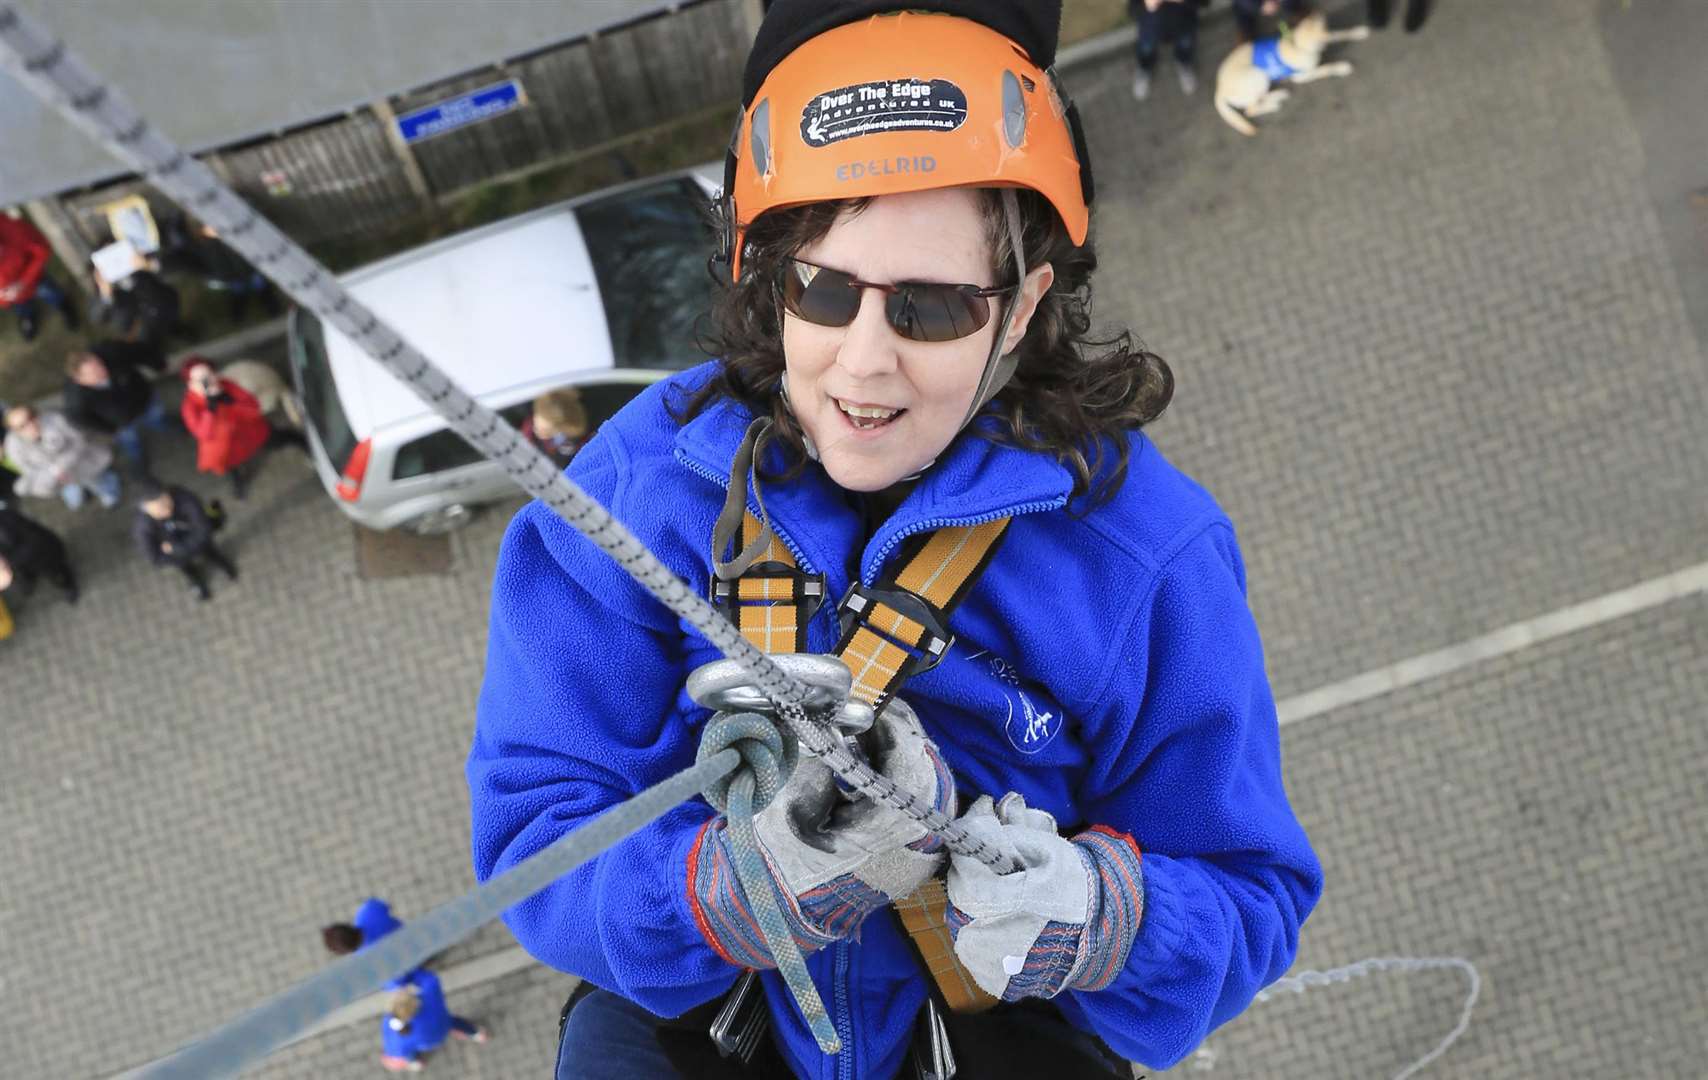 Sue Mason, from Sittingbourne, raised money for Guide Dogs Medway in the KM Charity Abseil